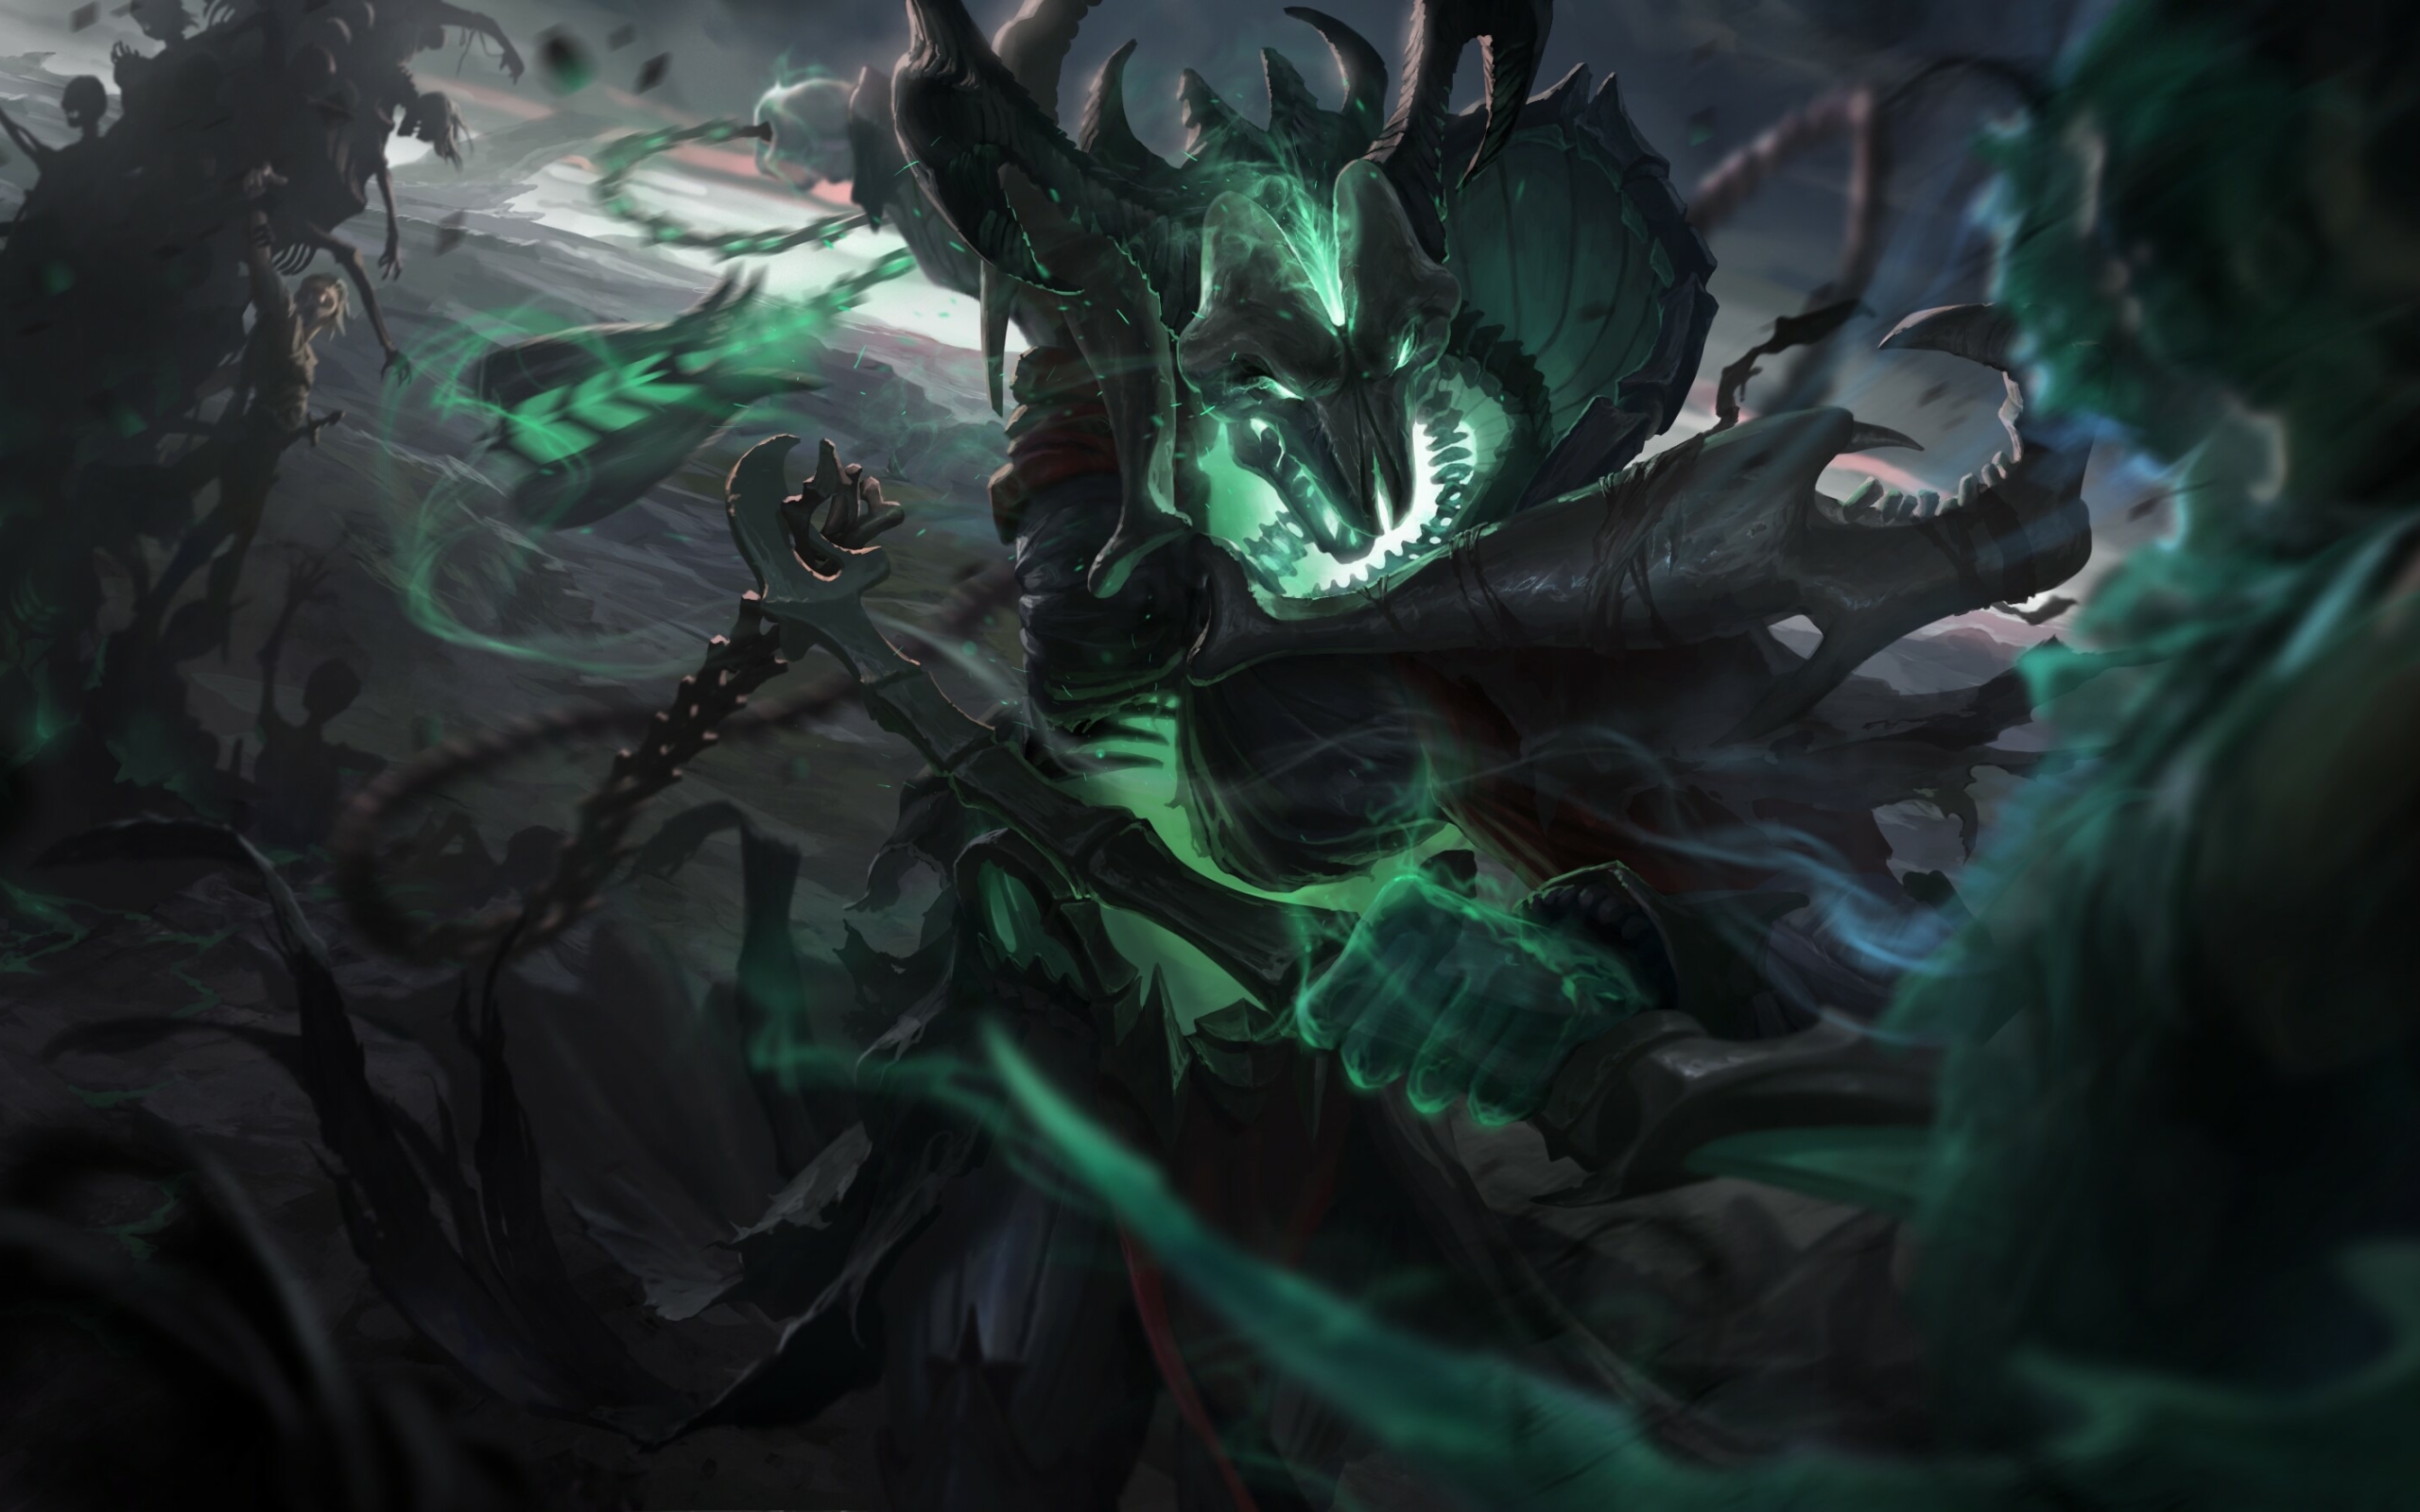 Wallpaper Of Video Game, League Of Legends, Thresh - League Of Legends Thresh Wallpaper Hd - HD Wallpaper 